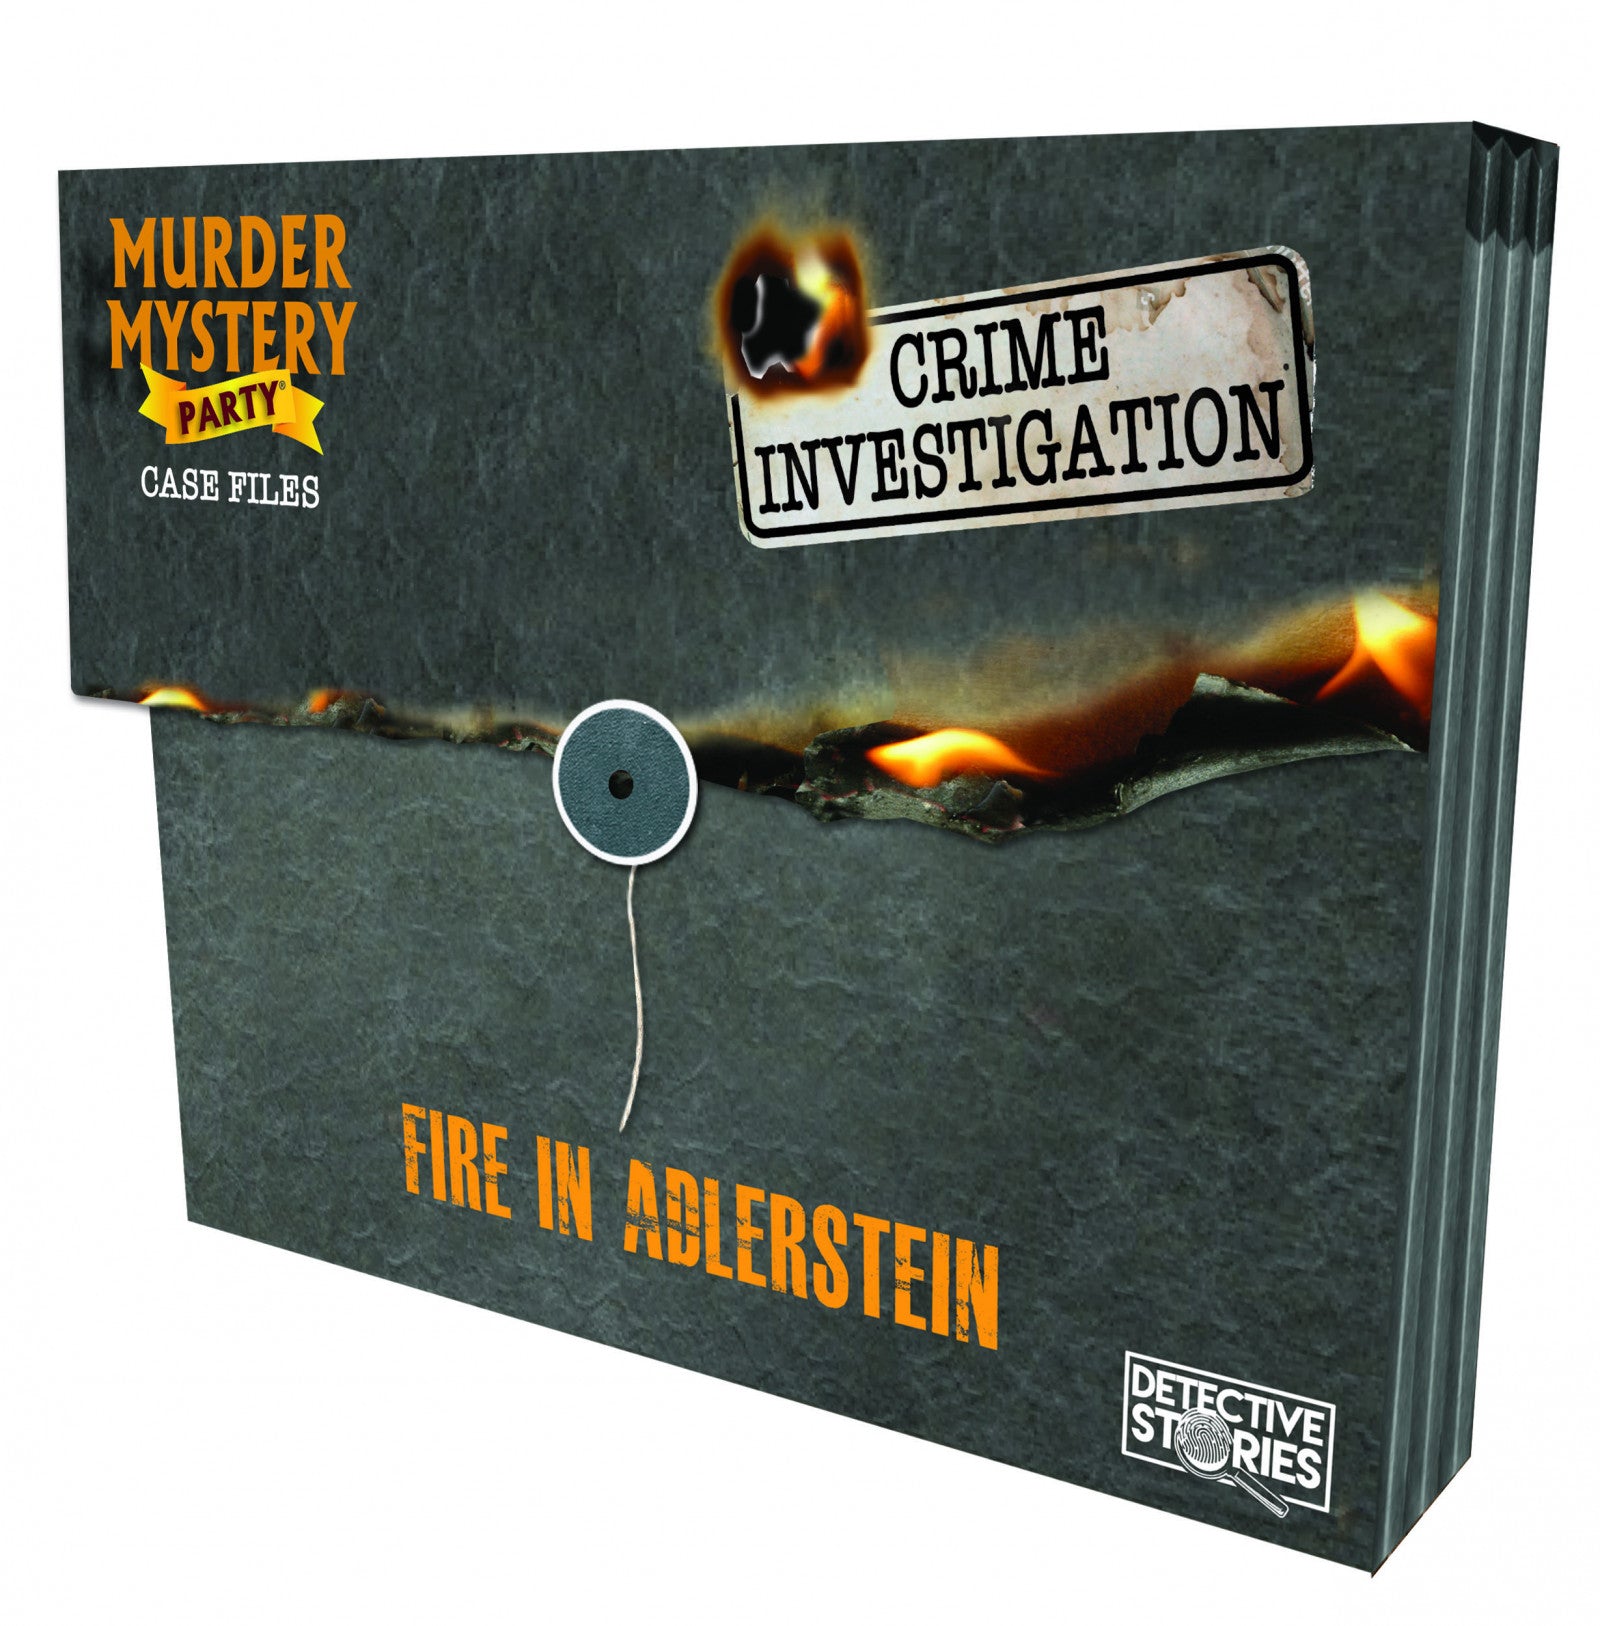 Murder Mystery Case Files - Unsolved Crimes: Fire in Adlerstein